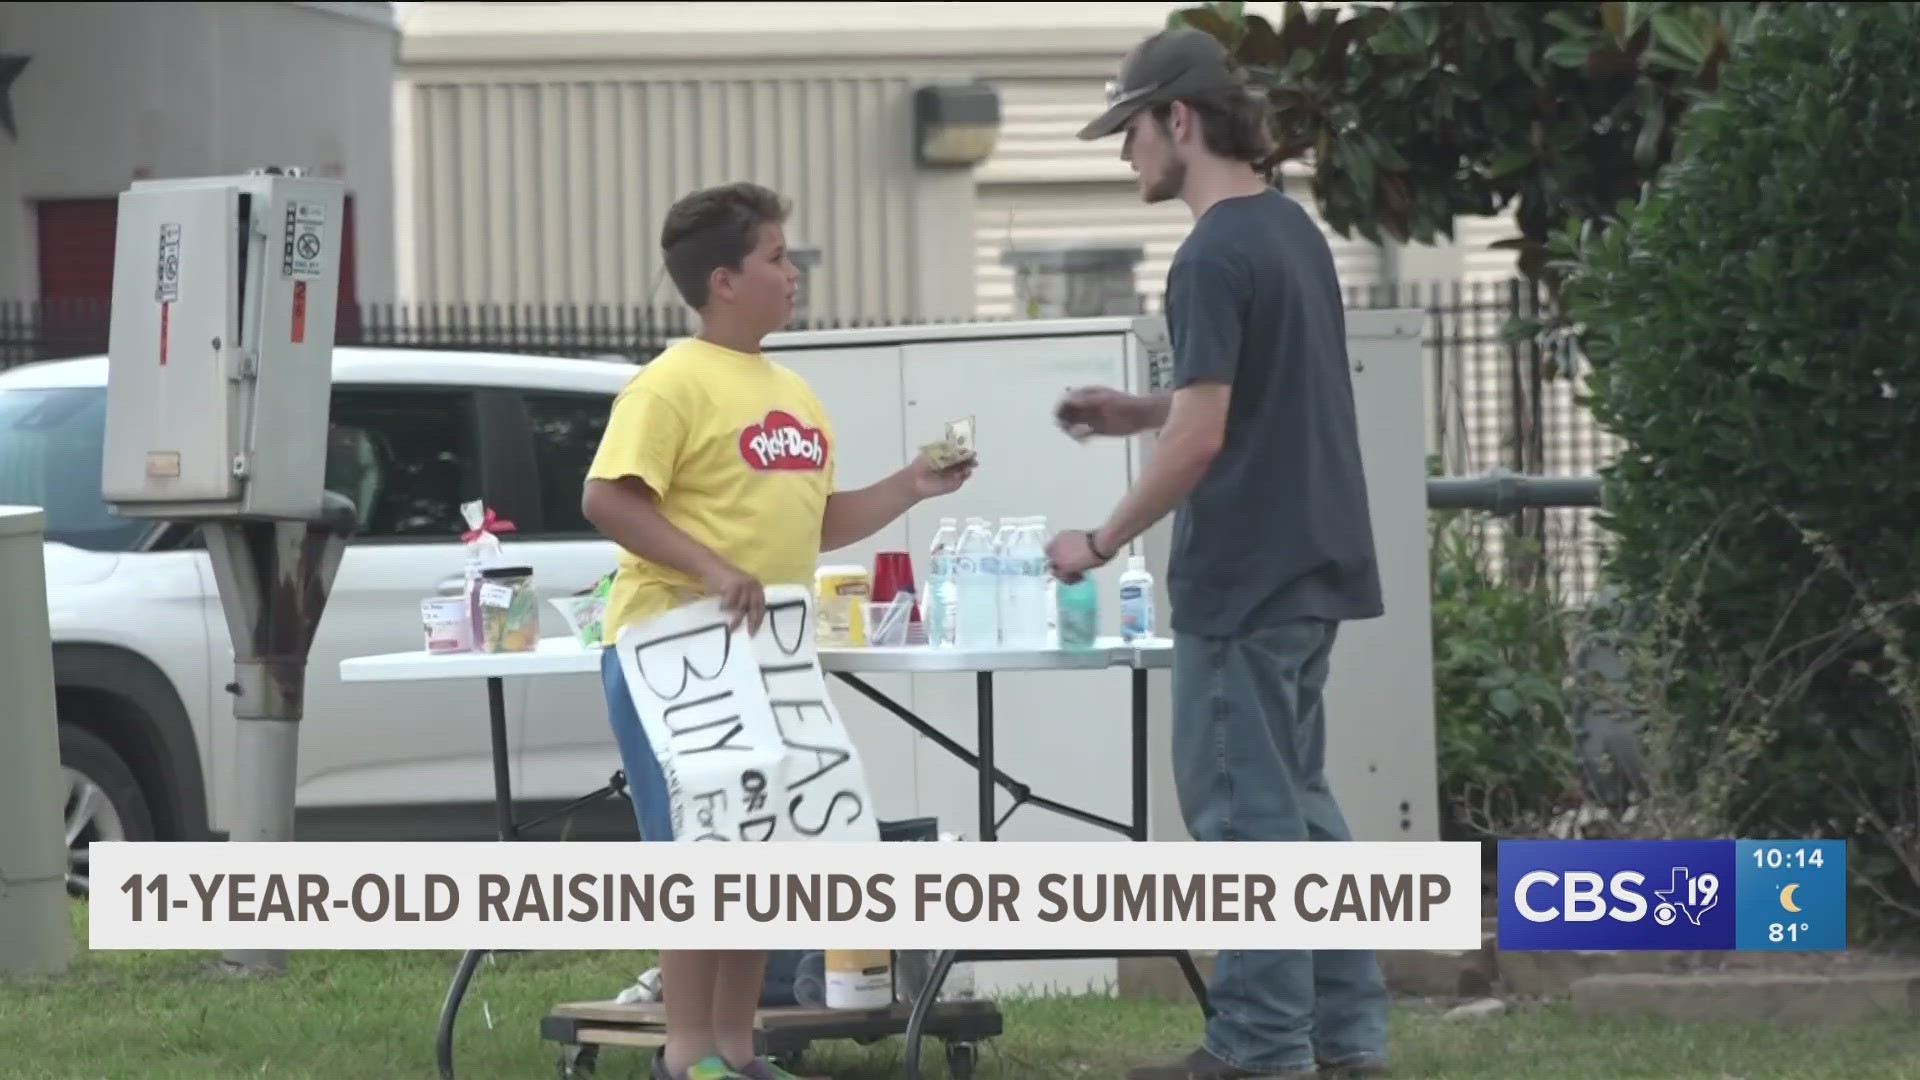 Joseph Hamilton is going the extra mile selling snacks and drinks off of Old Bullard Road to make sure he attends Frontier Camp.